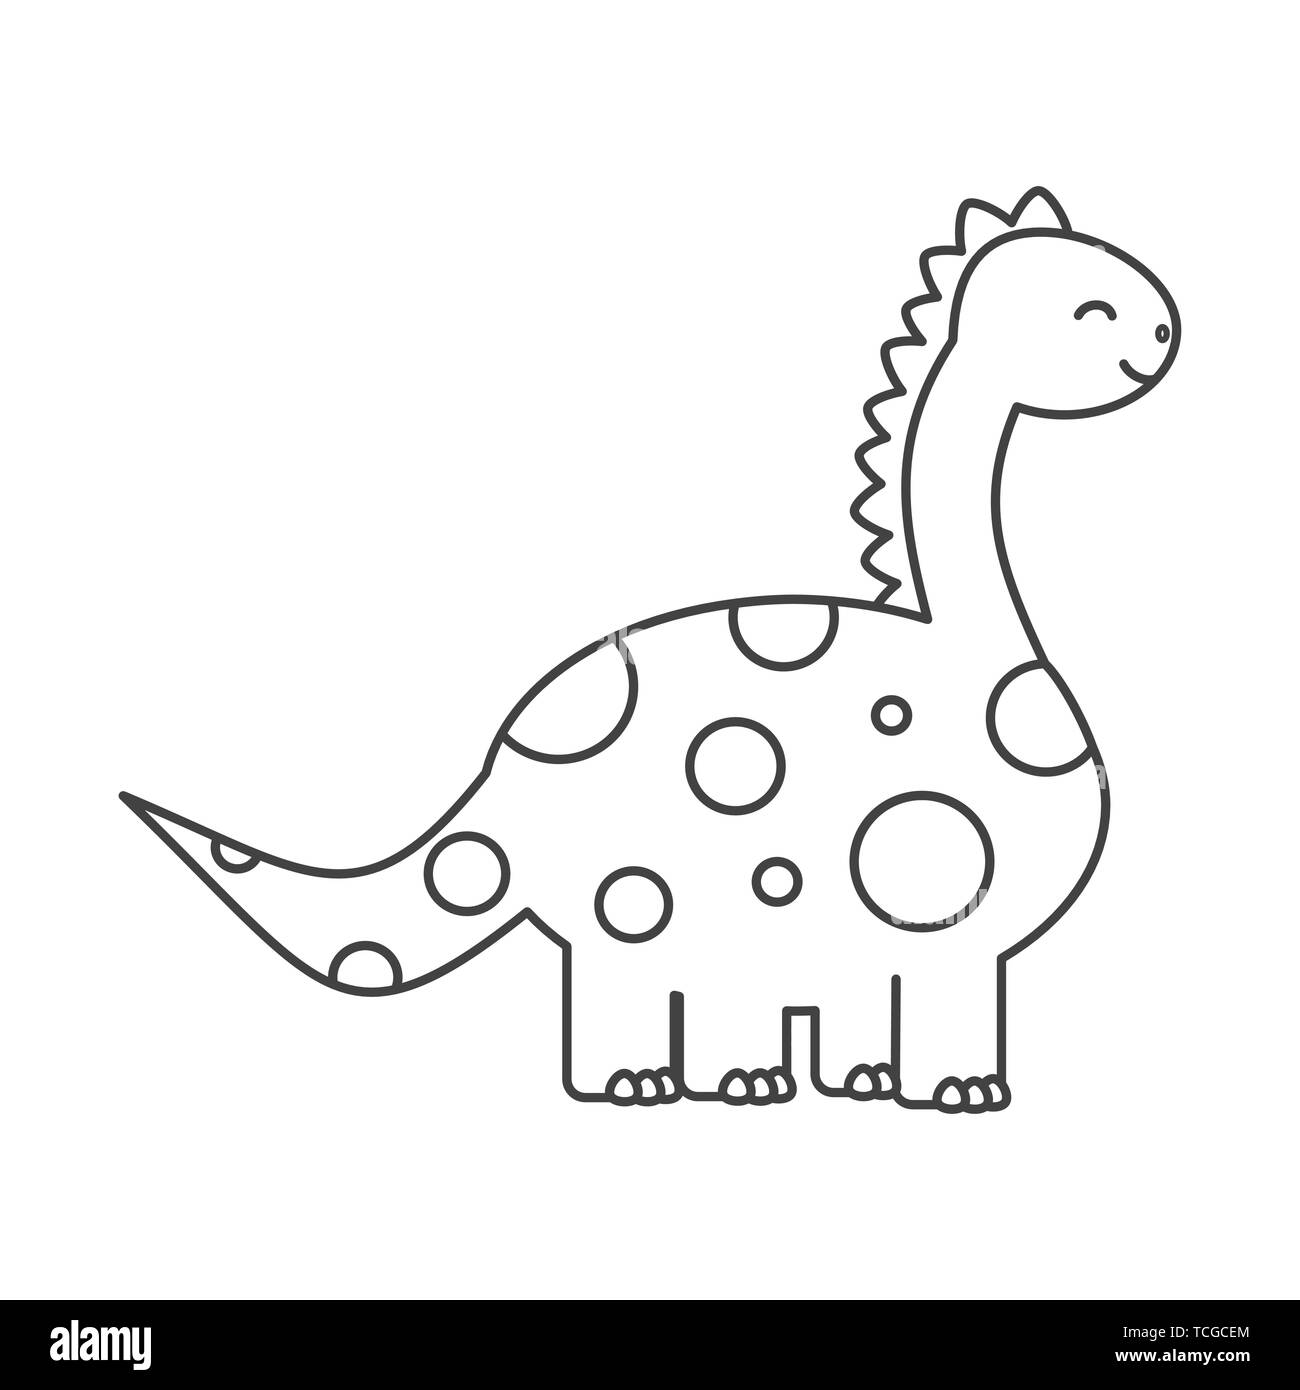 How To Draw a Cartoon T-Rex Easily | Quickdraw